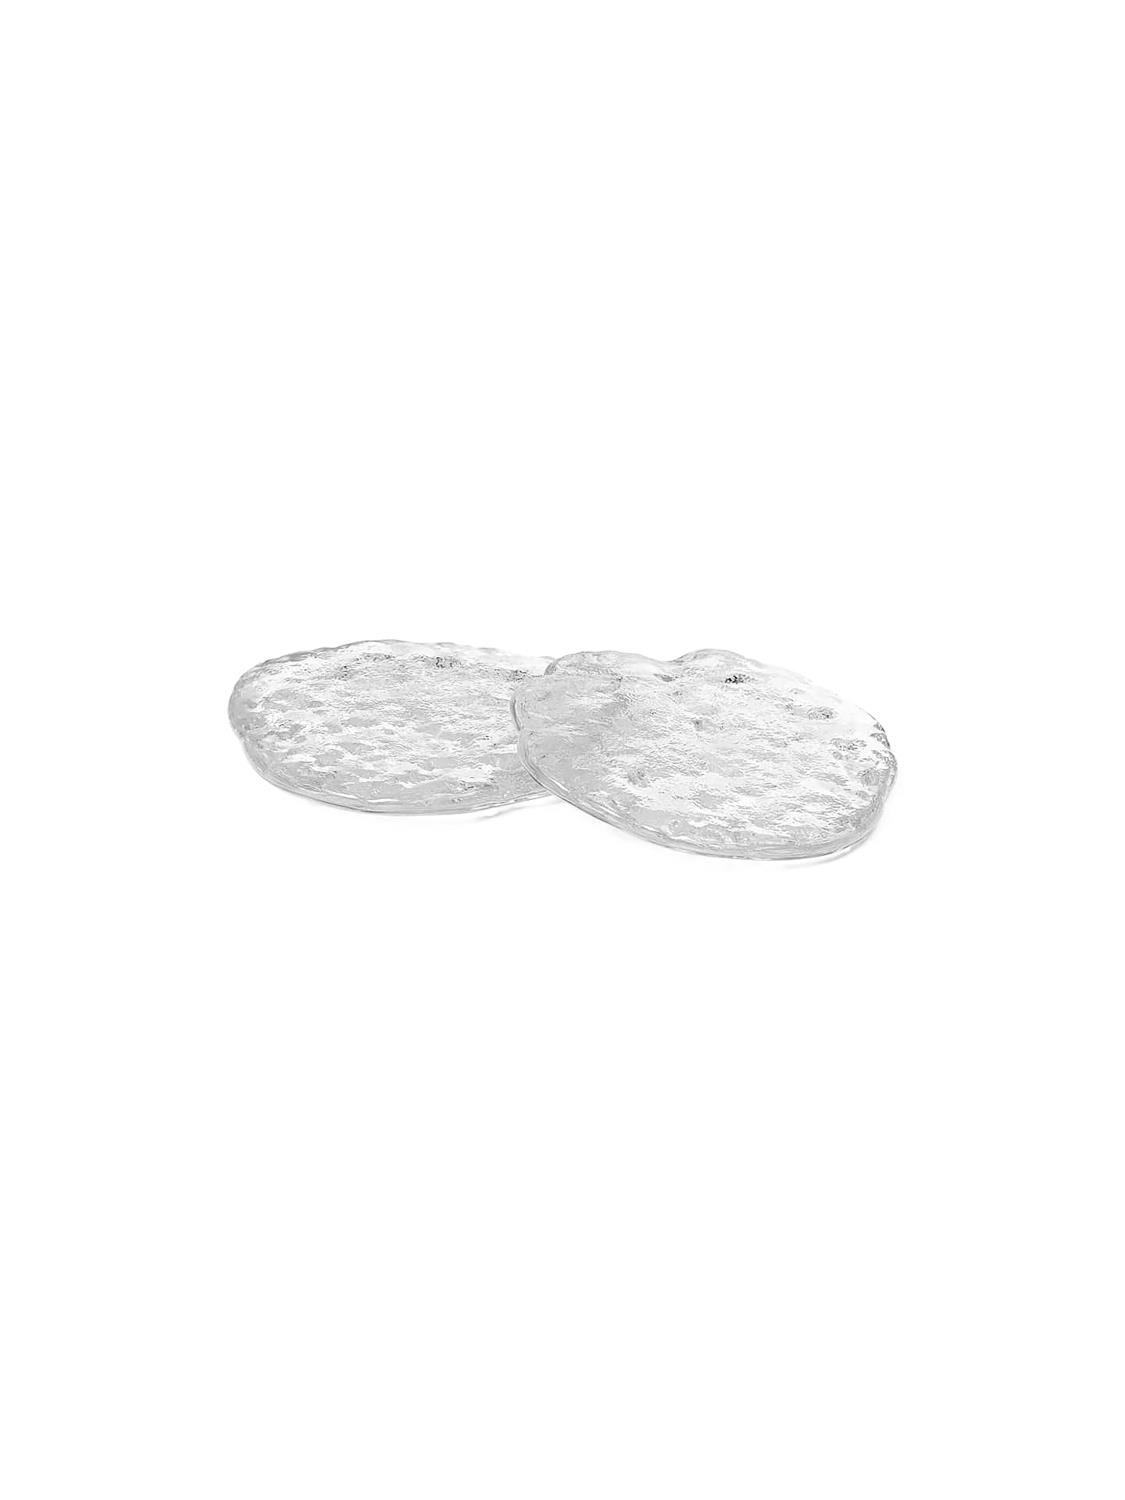 Ferm Living - Momento Glass Stones - Set of 2 - Clear